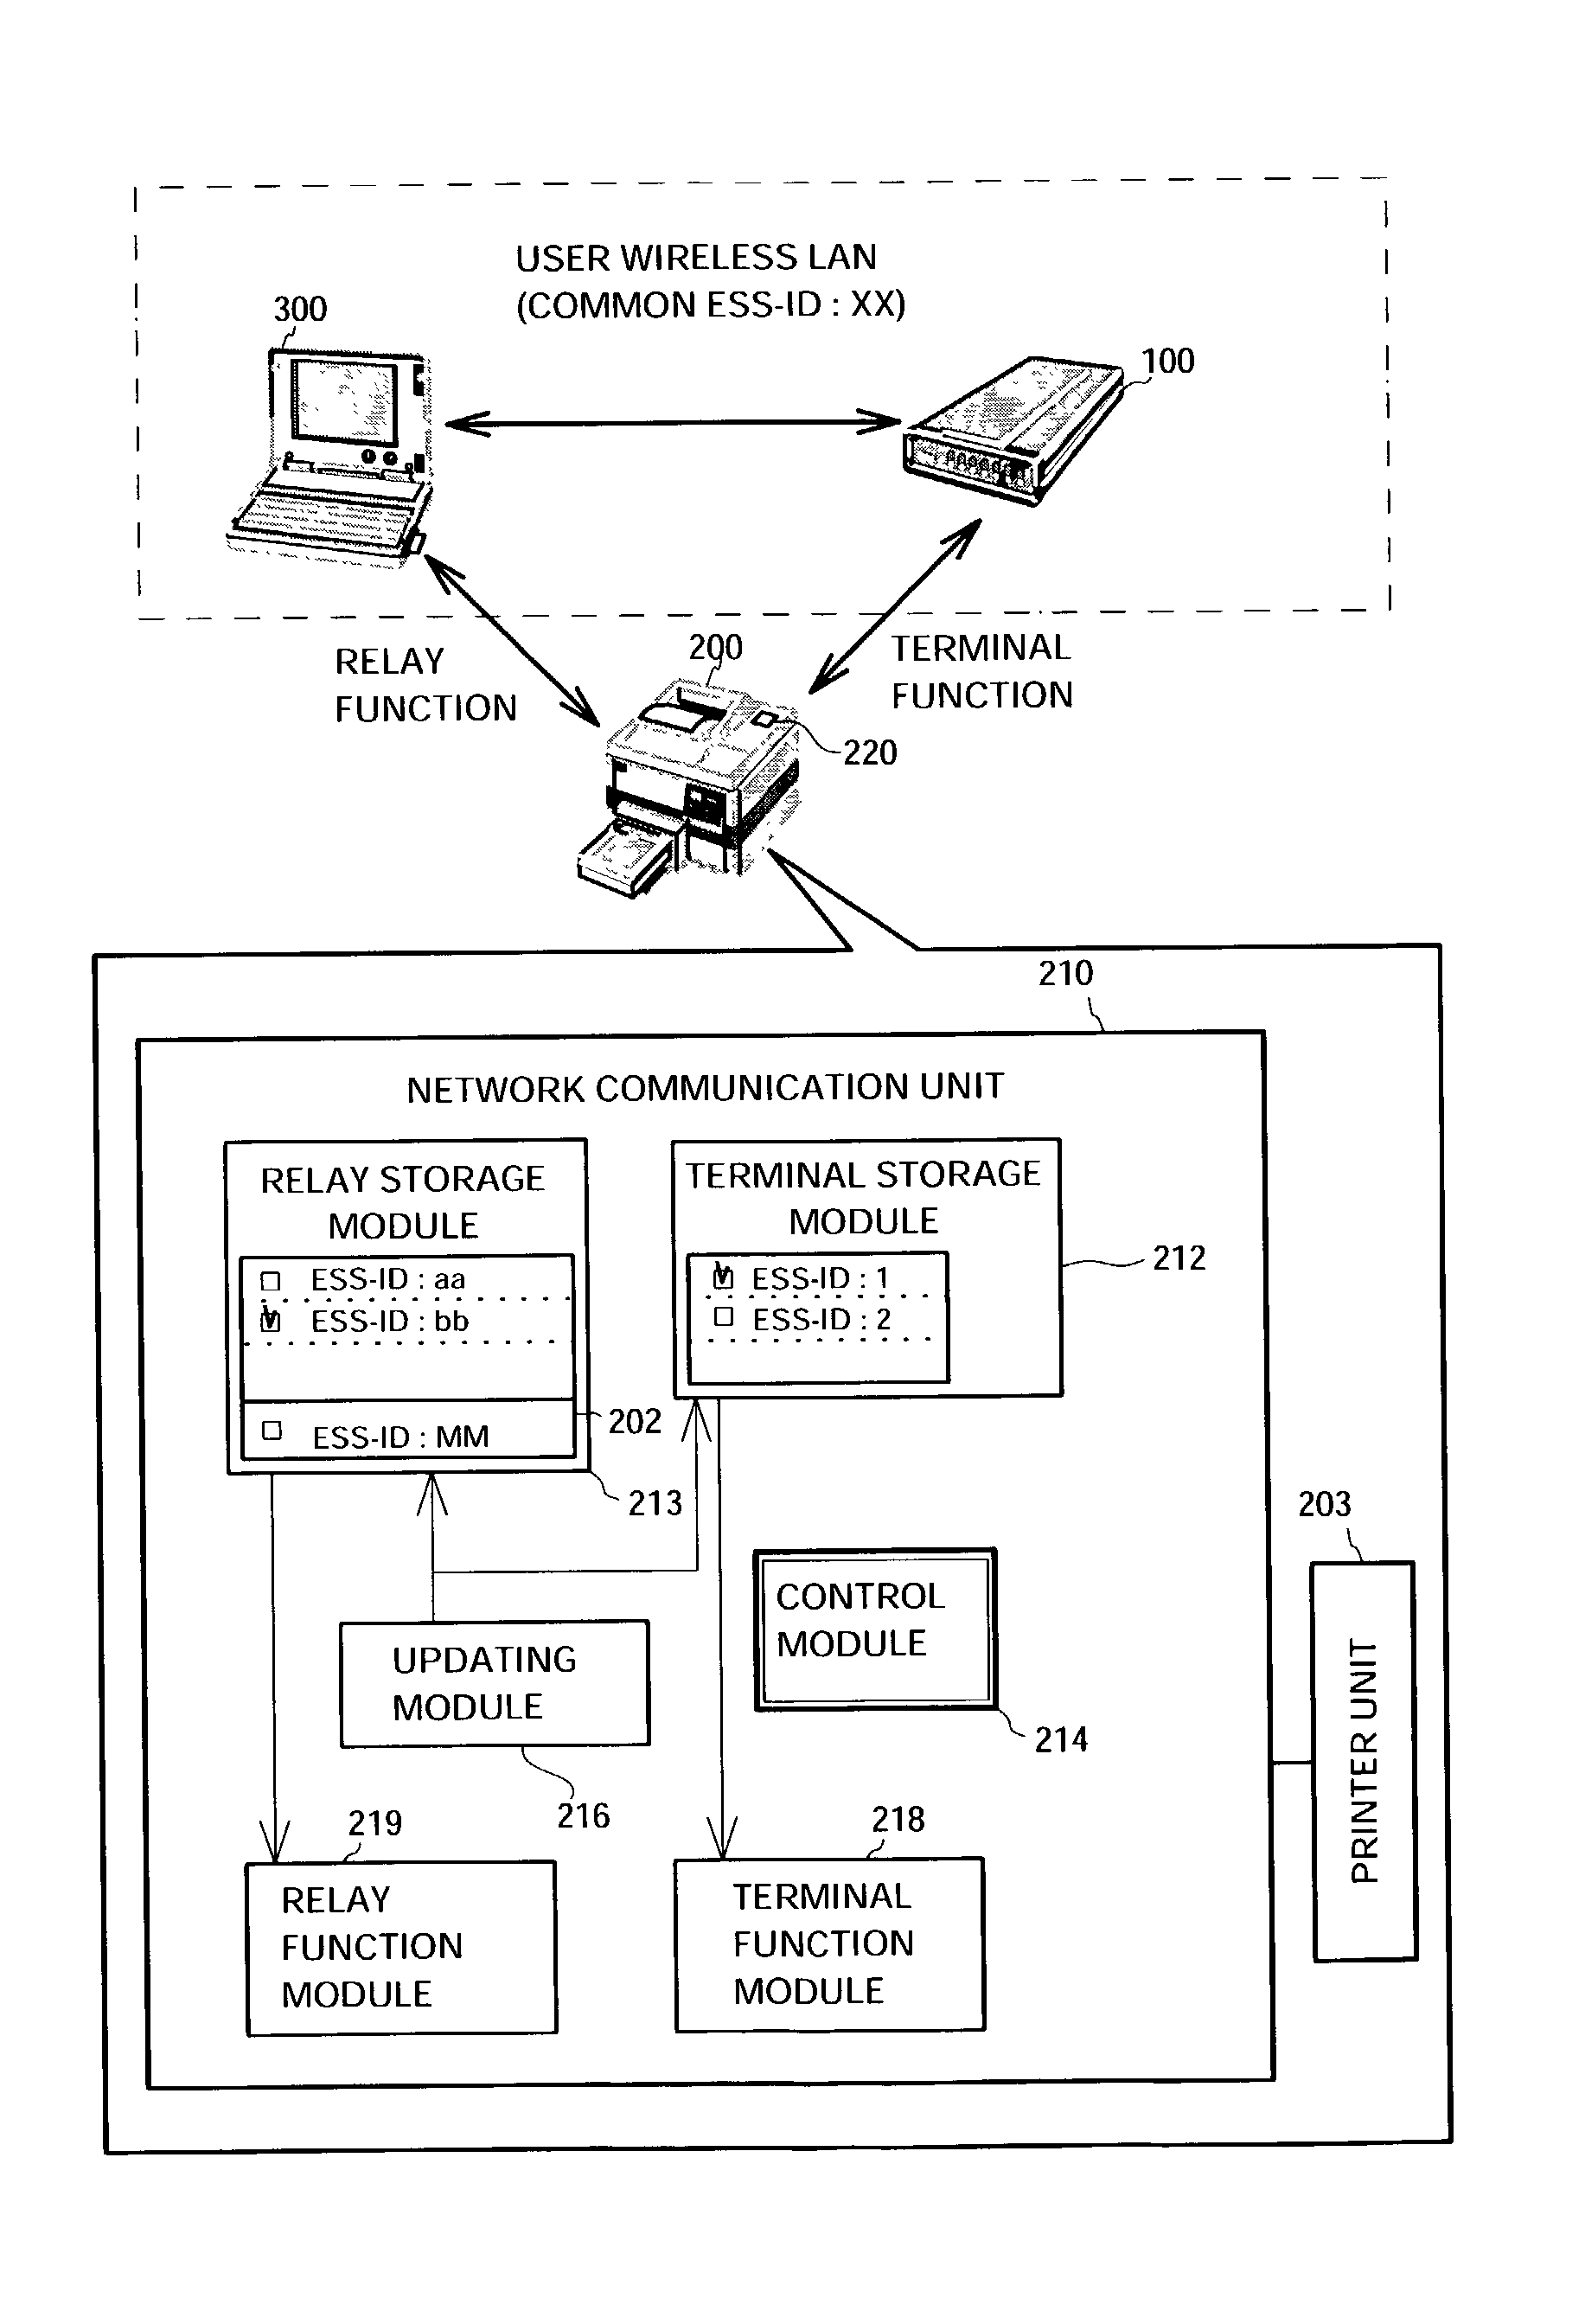 Station for wireless network